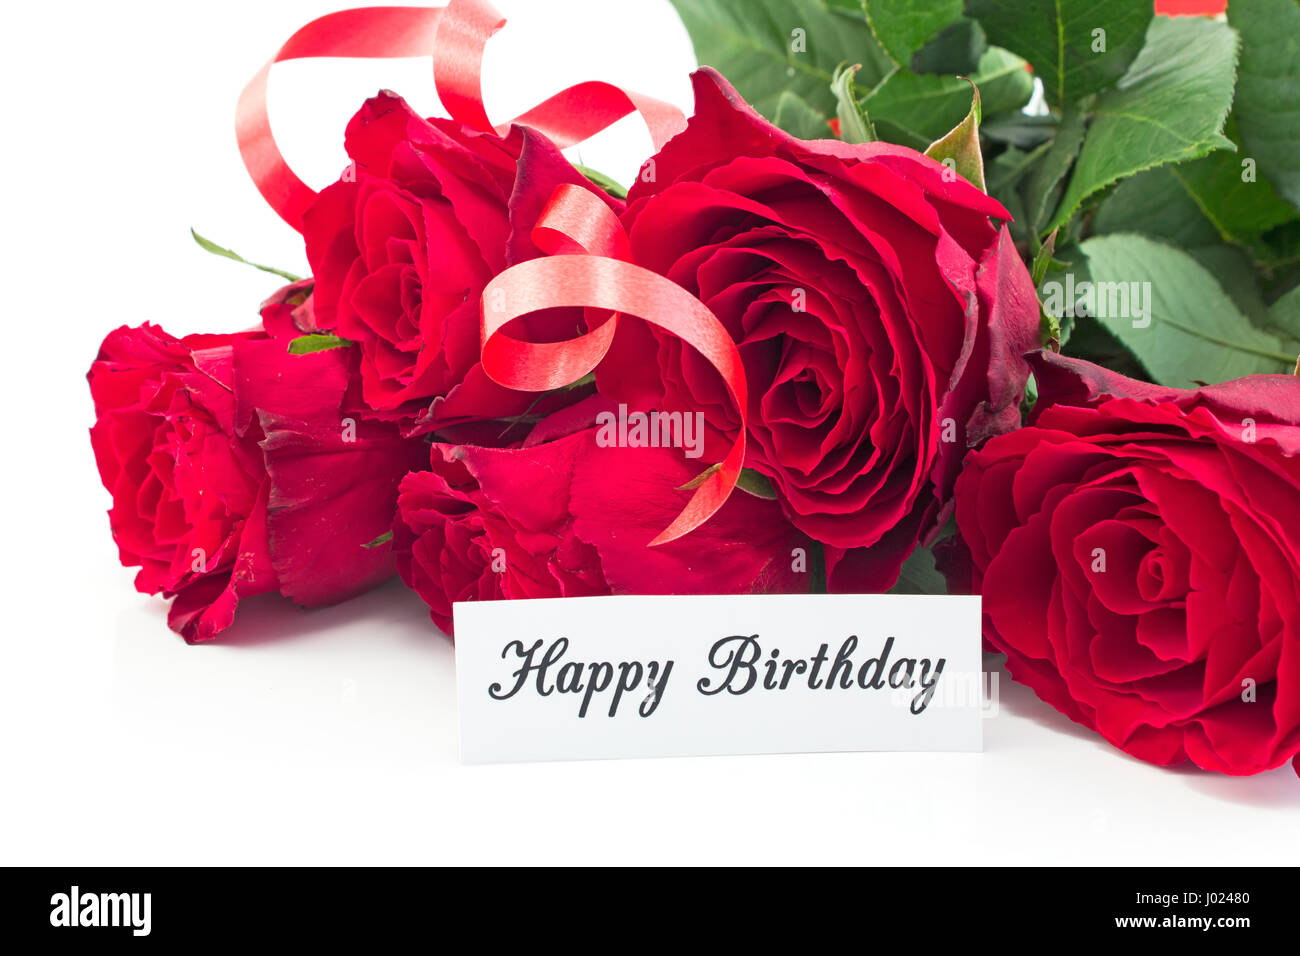 Happy Birthday Card with Bouquet of Red Roses, on White Background. Stock Photo